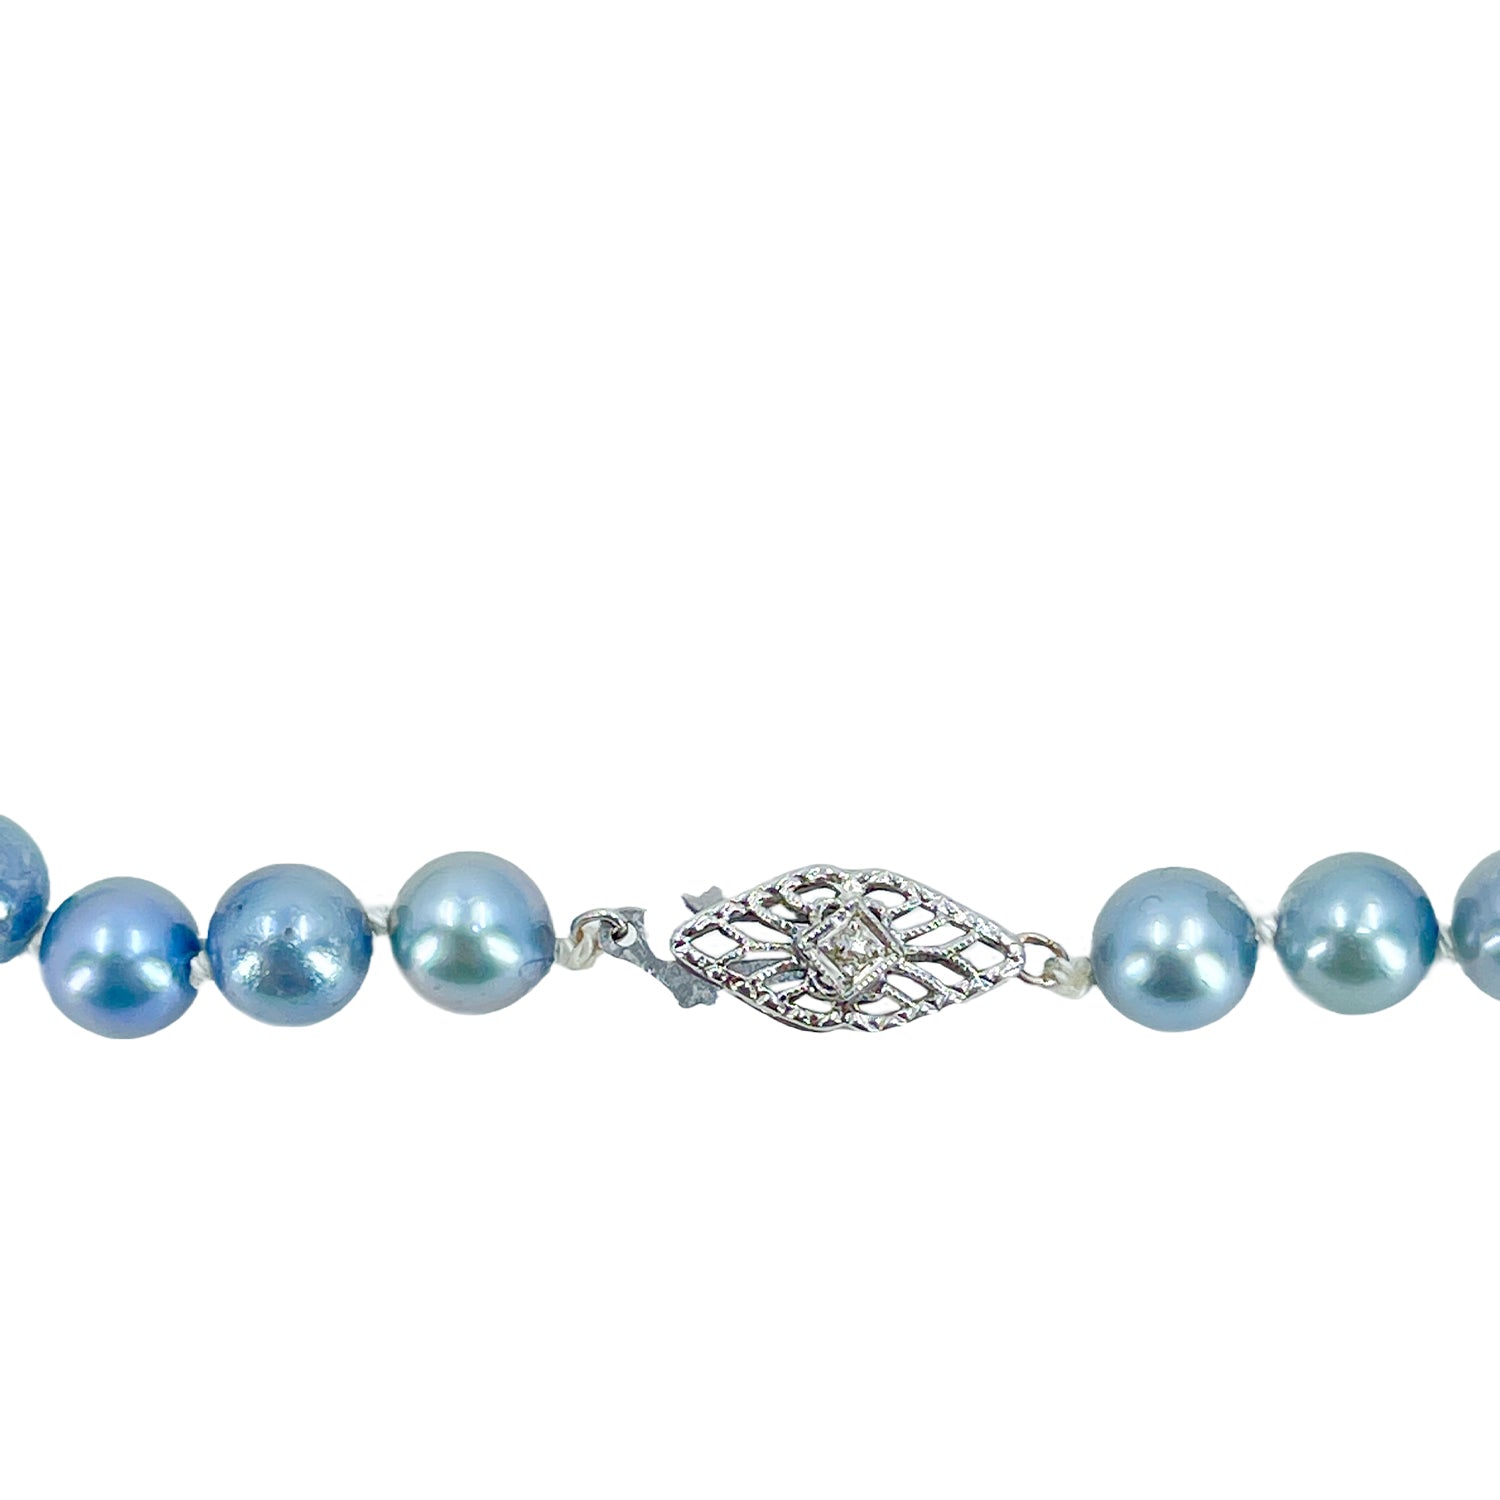 Diamond Filigree Vintage Blue Japanese Saltwater Cultured Akoya Pearl Necklace - White Gold 17.50 Inch